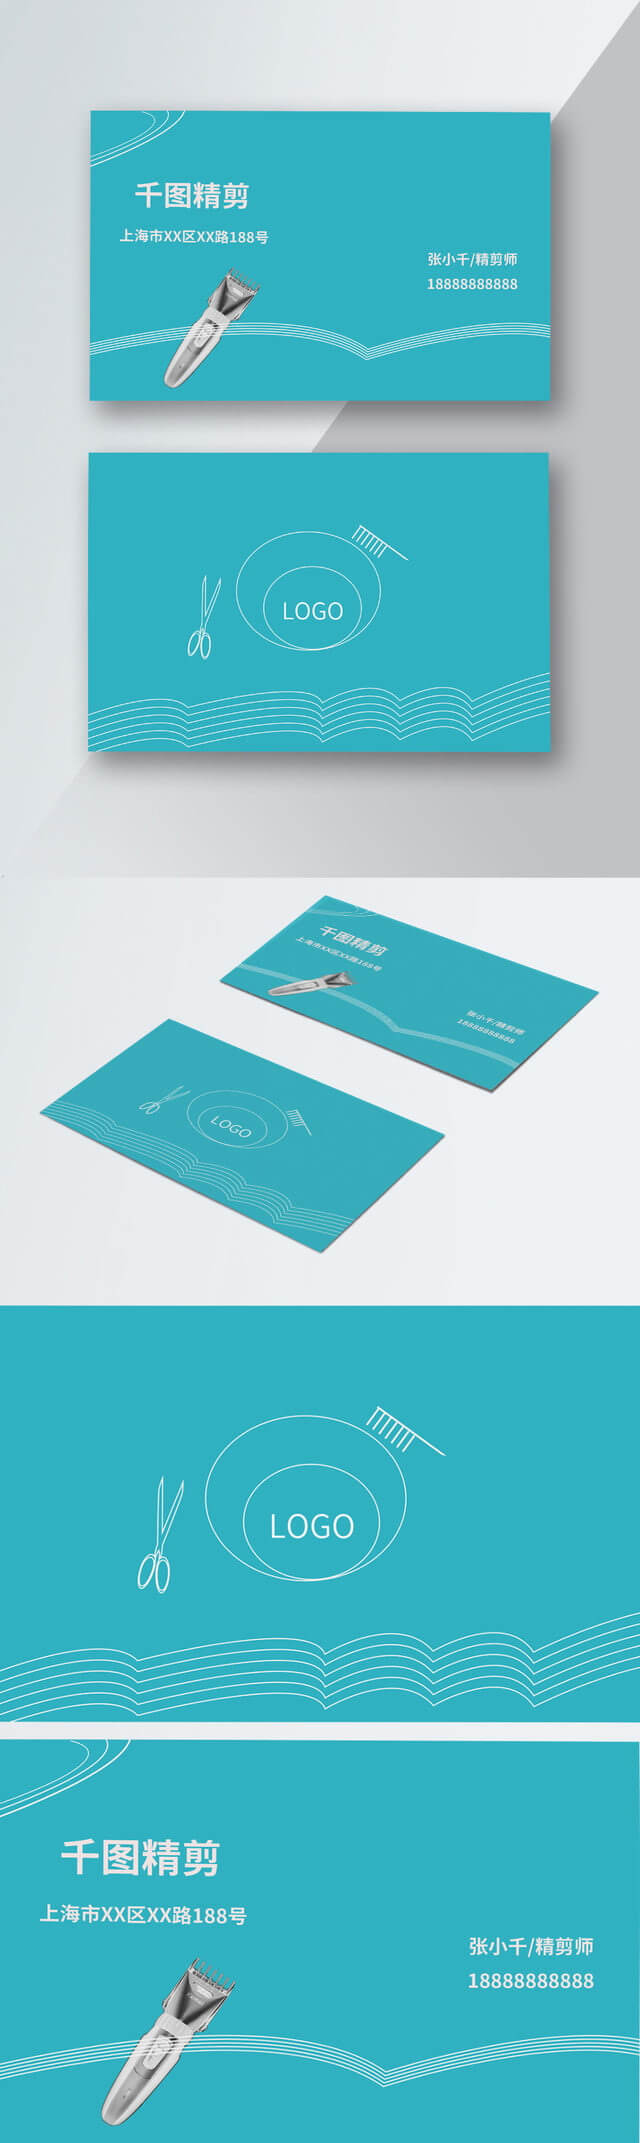 Haircut Business Card Barber Shop Business Card Hair Stylist Throughout Hairdresser Business Card Templates Free